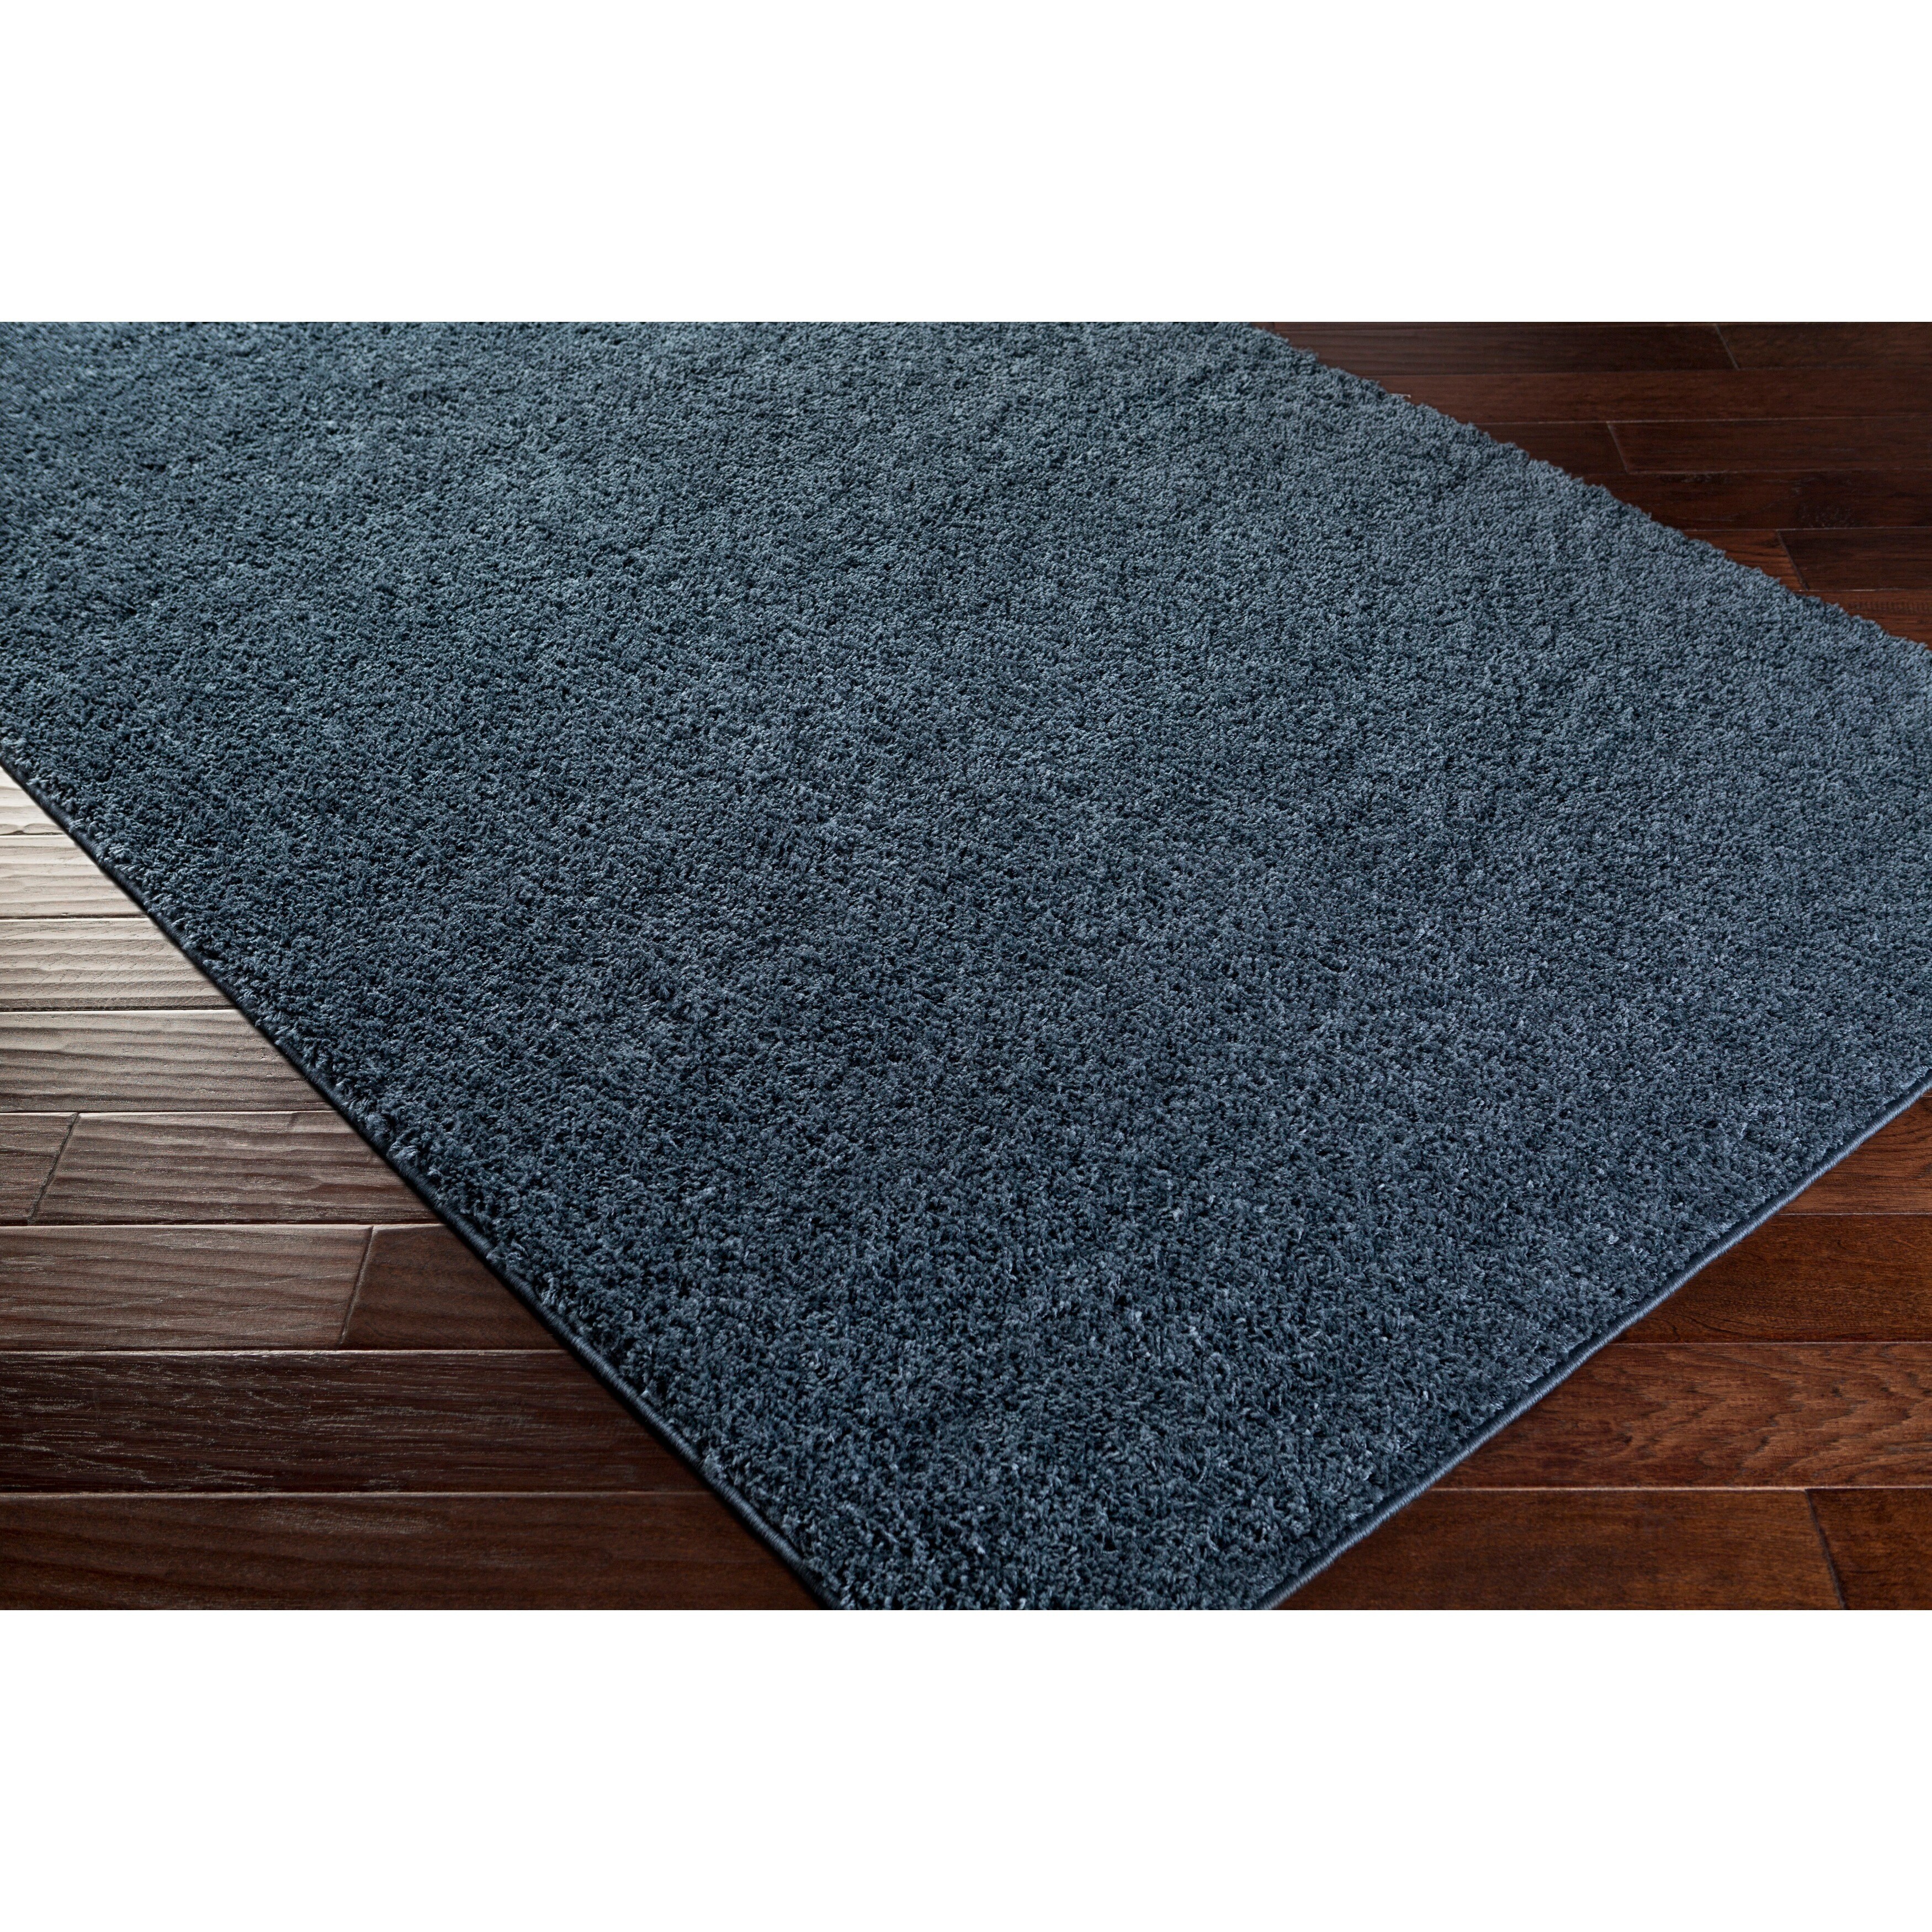 Buy Accent Blue Area Rugs Online At Overstockcom Our Best Rugs Deals